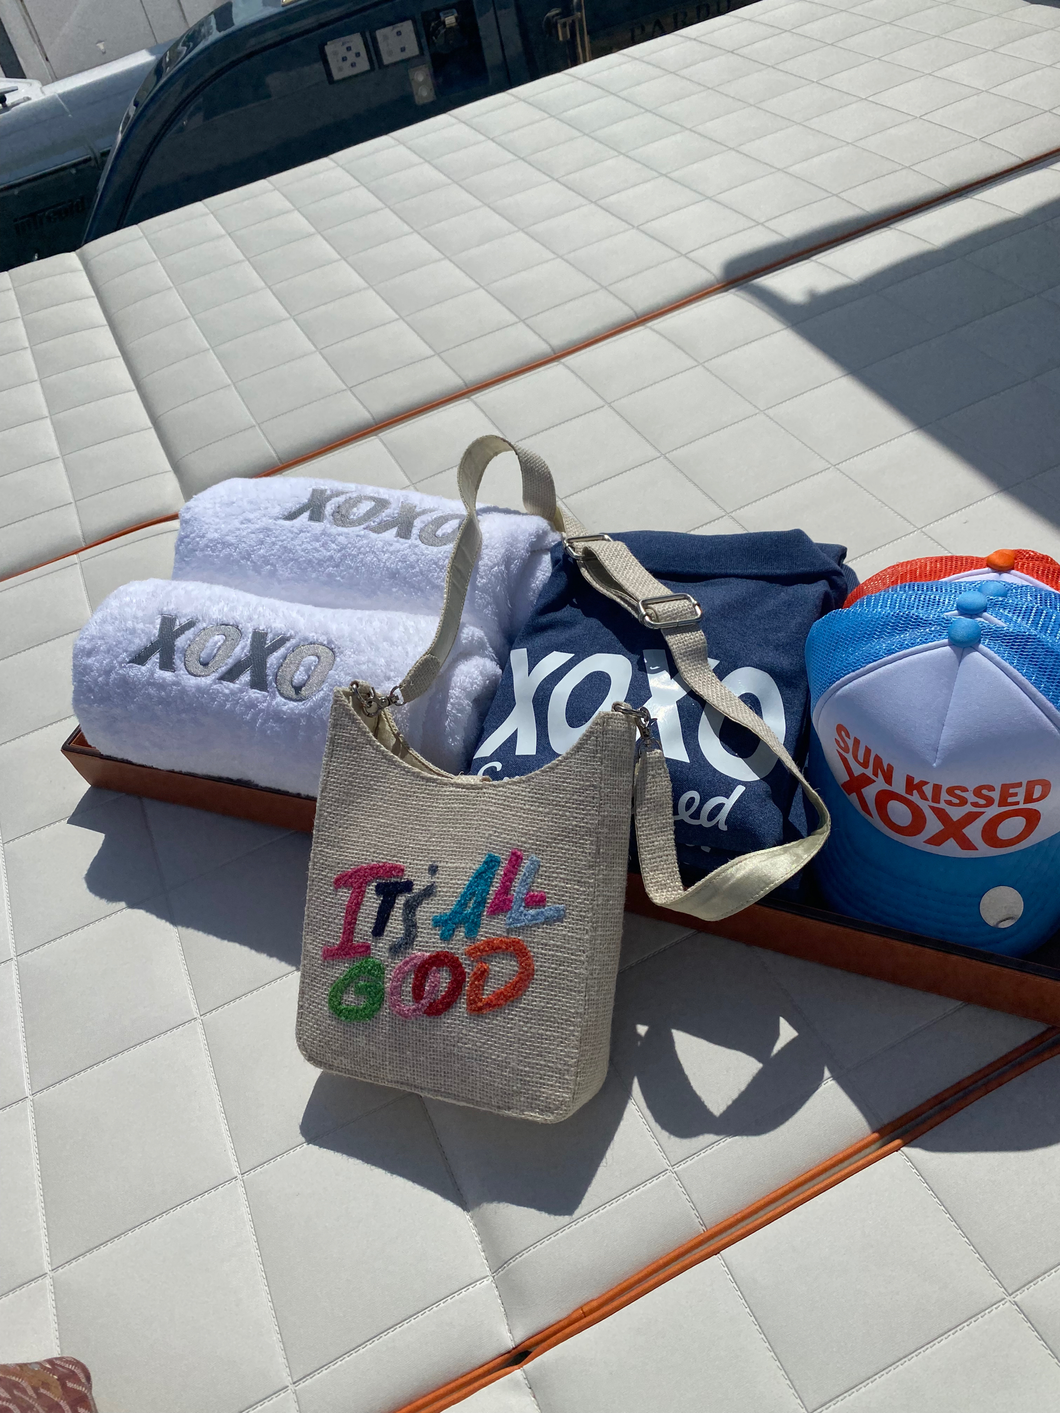 The Evy Bag: It's All Good